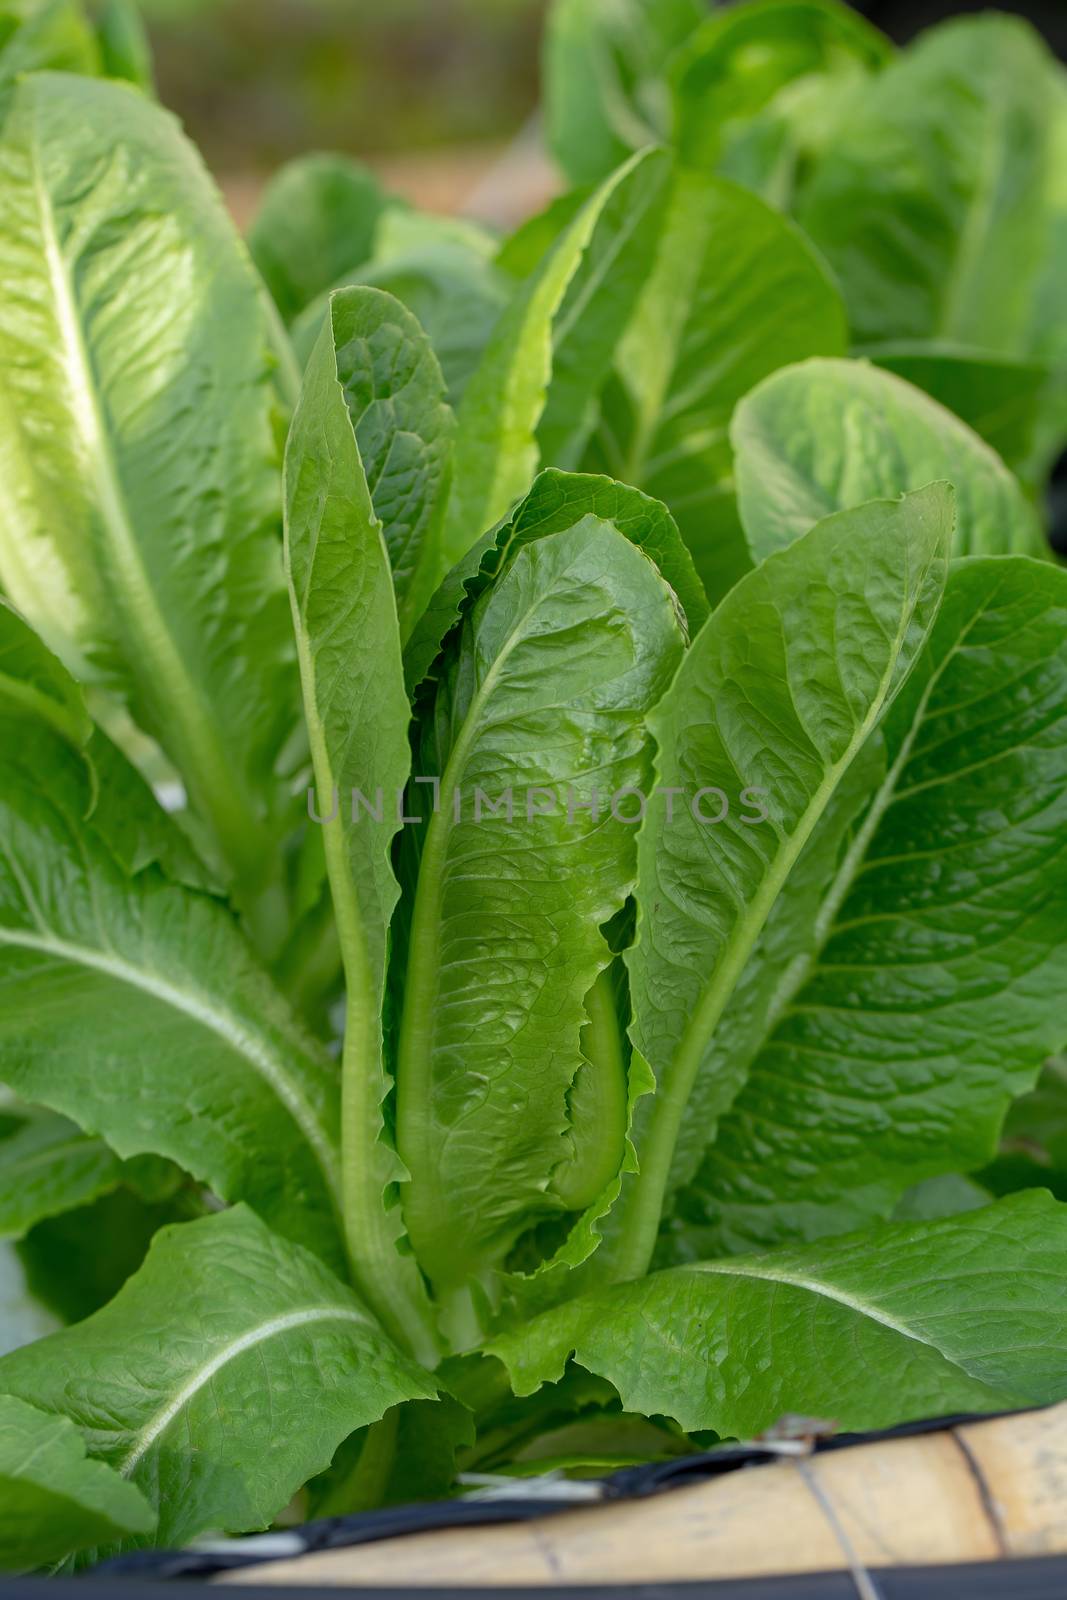 Green Cos lettuce leaves, Salads vegetable hydroponics farm by kaiskynet